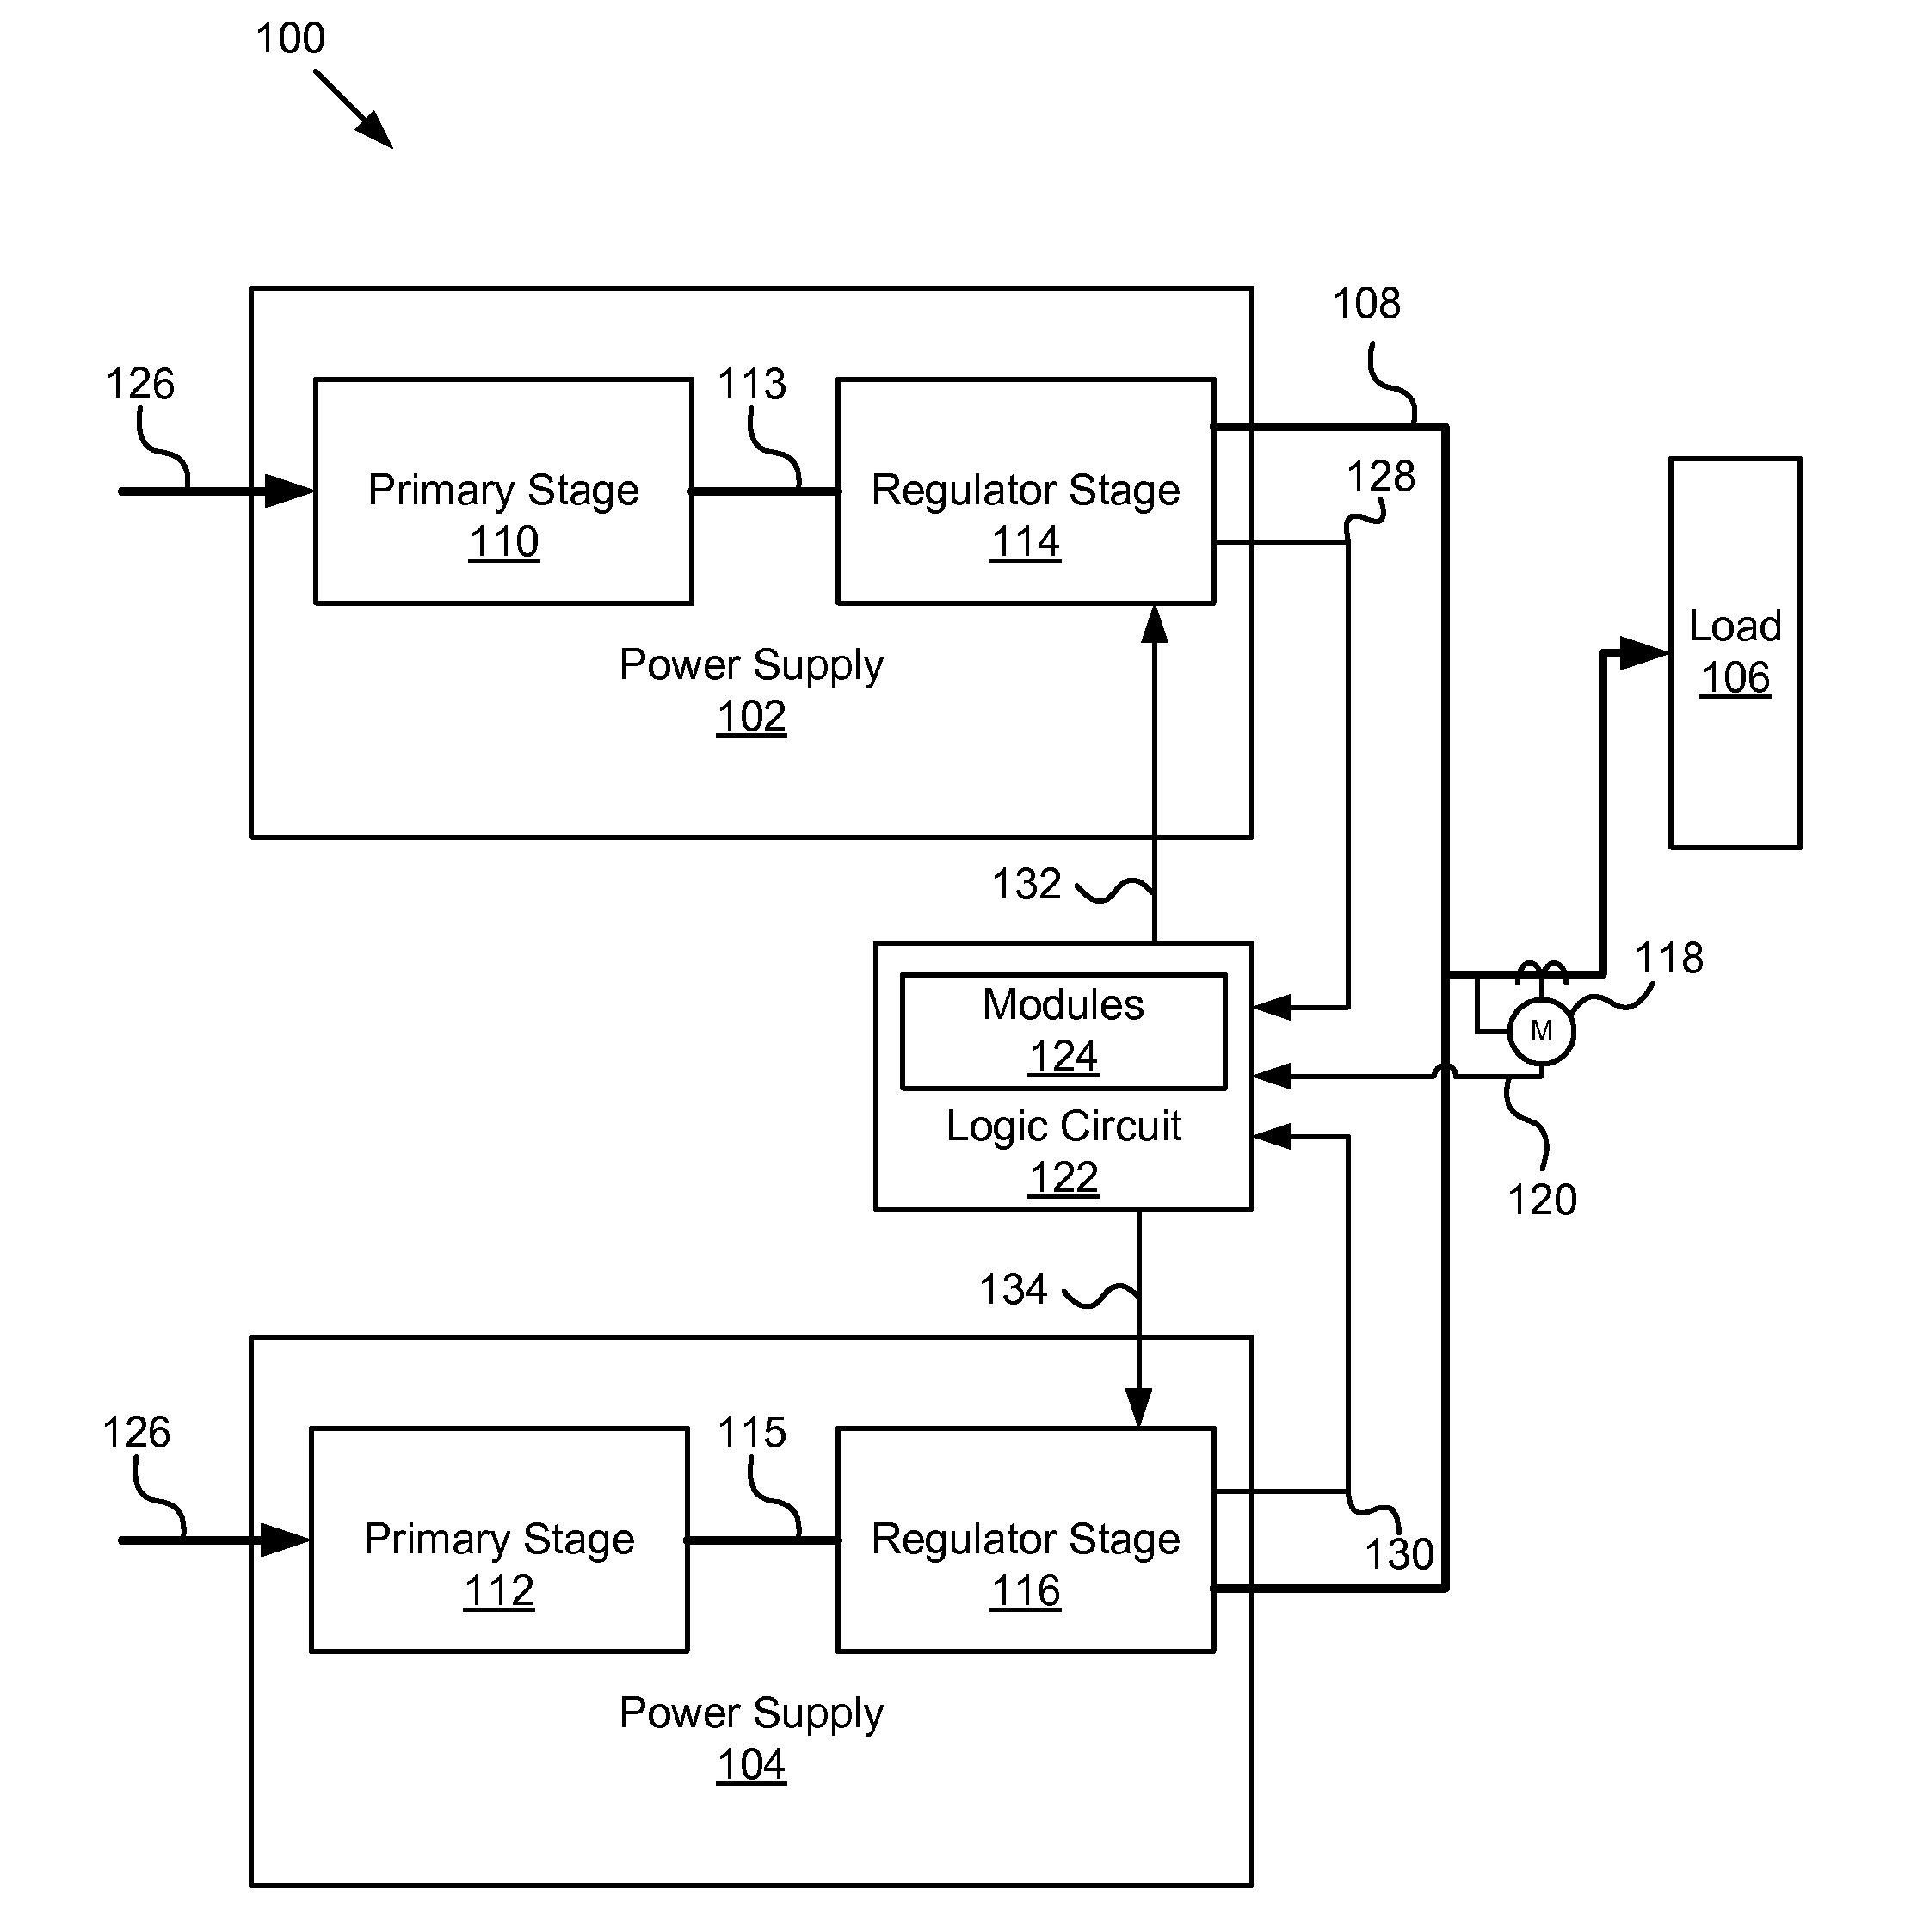 Apparatus, system, and method for a high efficiency redundant power system